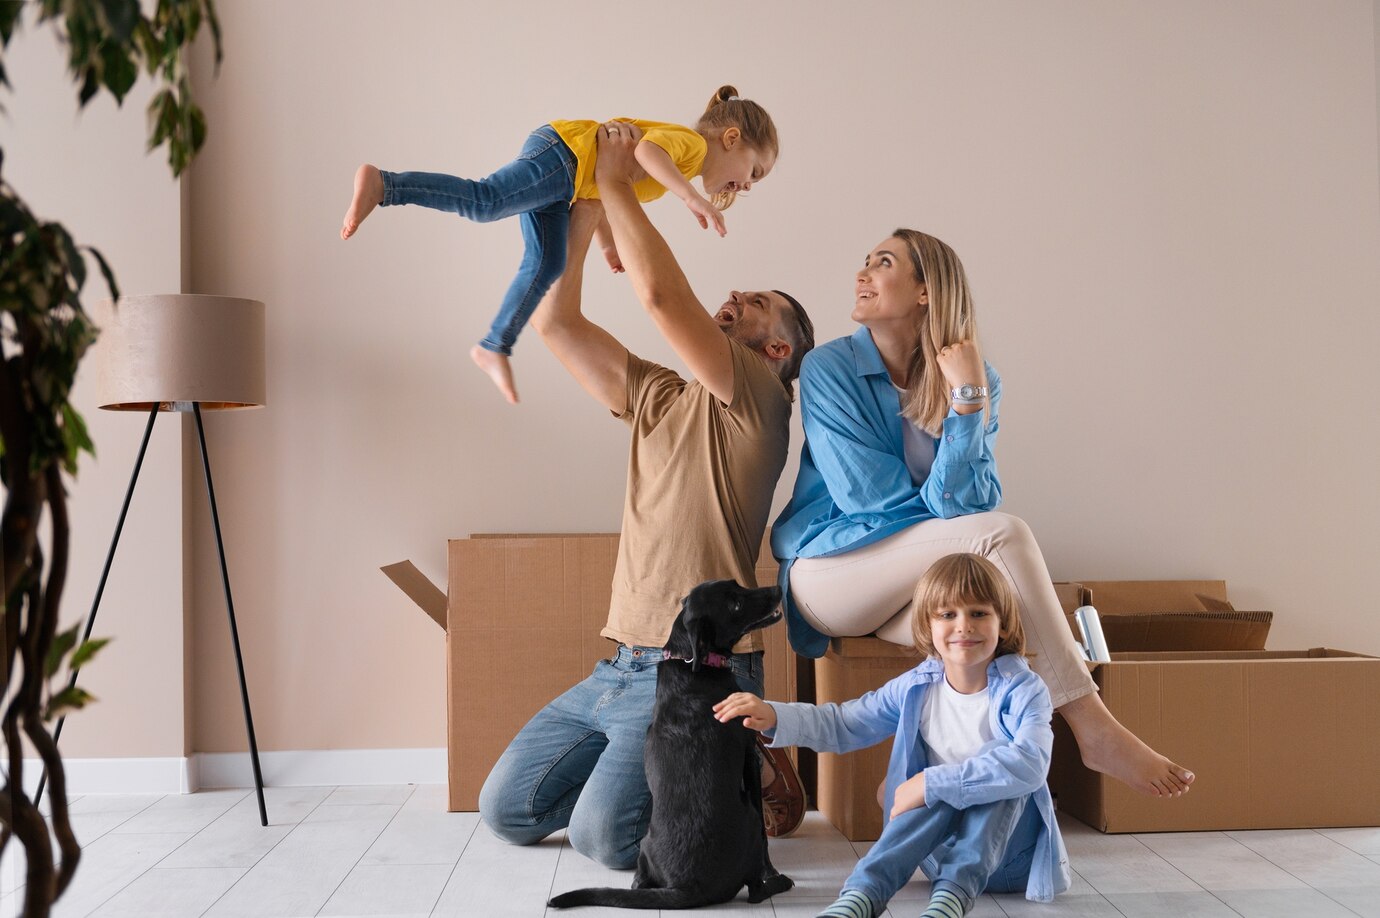 happy-family-with-dog-moving-in-new-home_23-2149749158.jpg